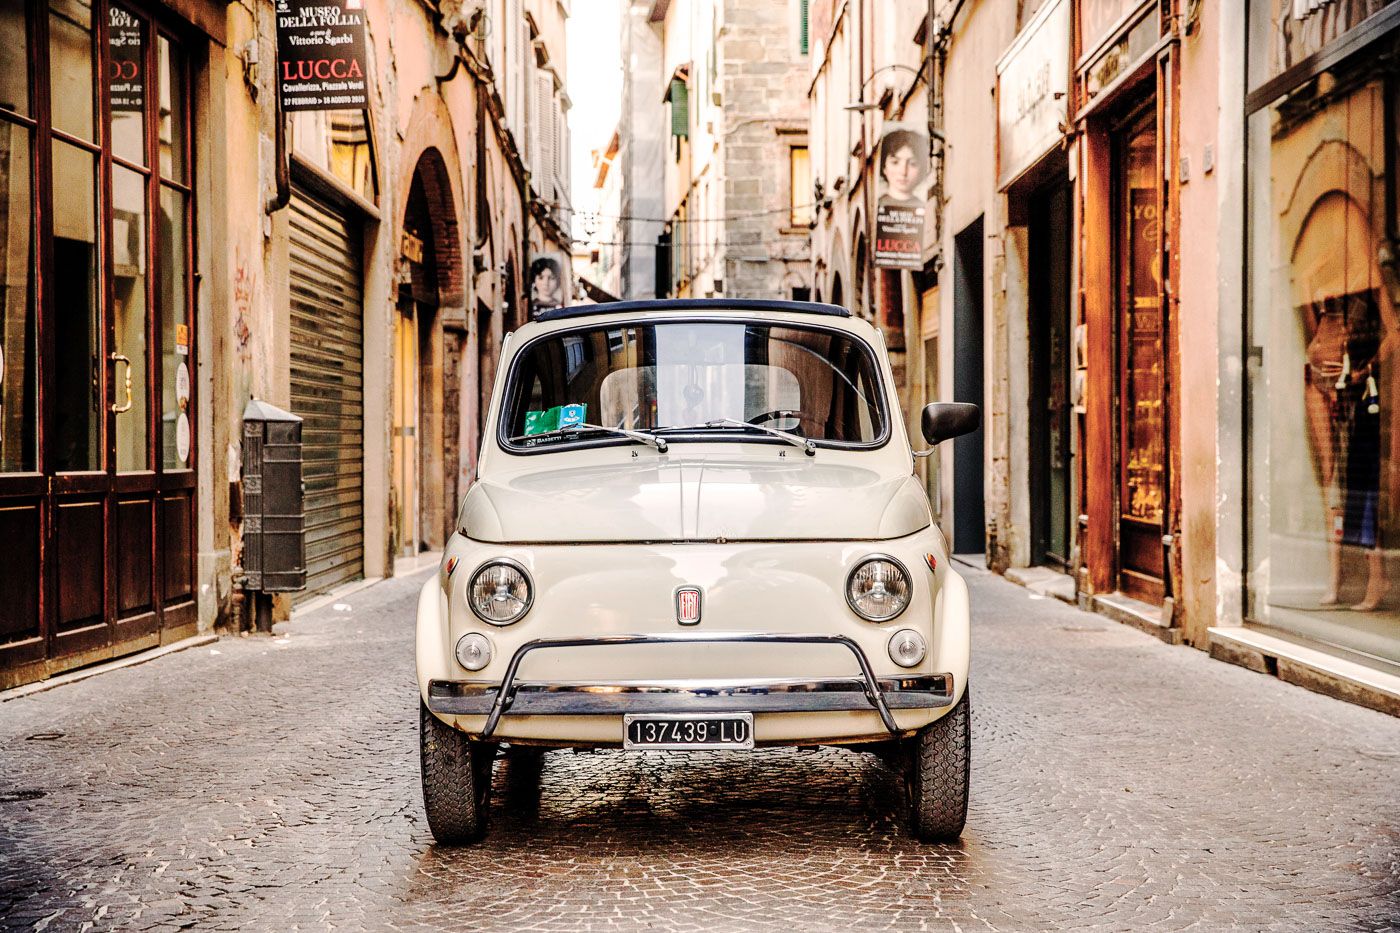 Fiat 500 is Real Italian Cars' Accessible Classic